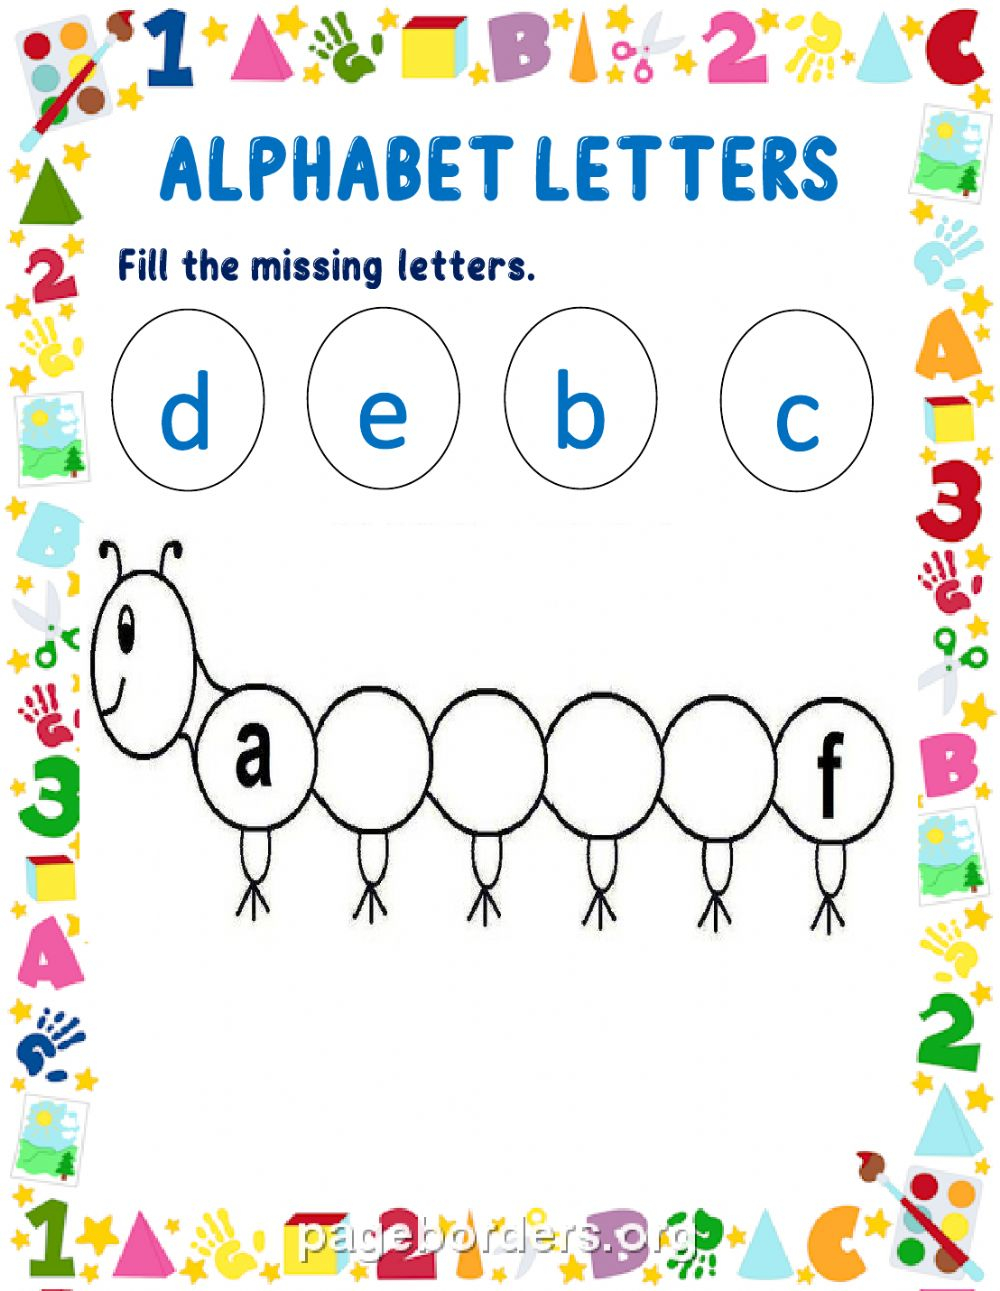 Alphabet Letters Interactive Worksheet with regard to Alphabet Reading Worksheets